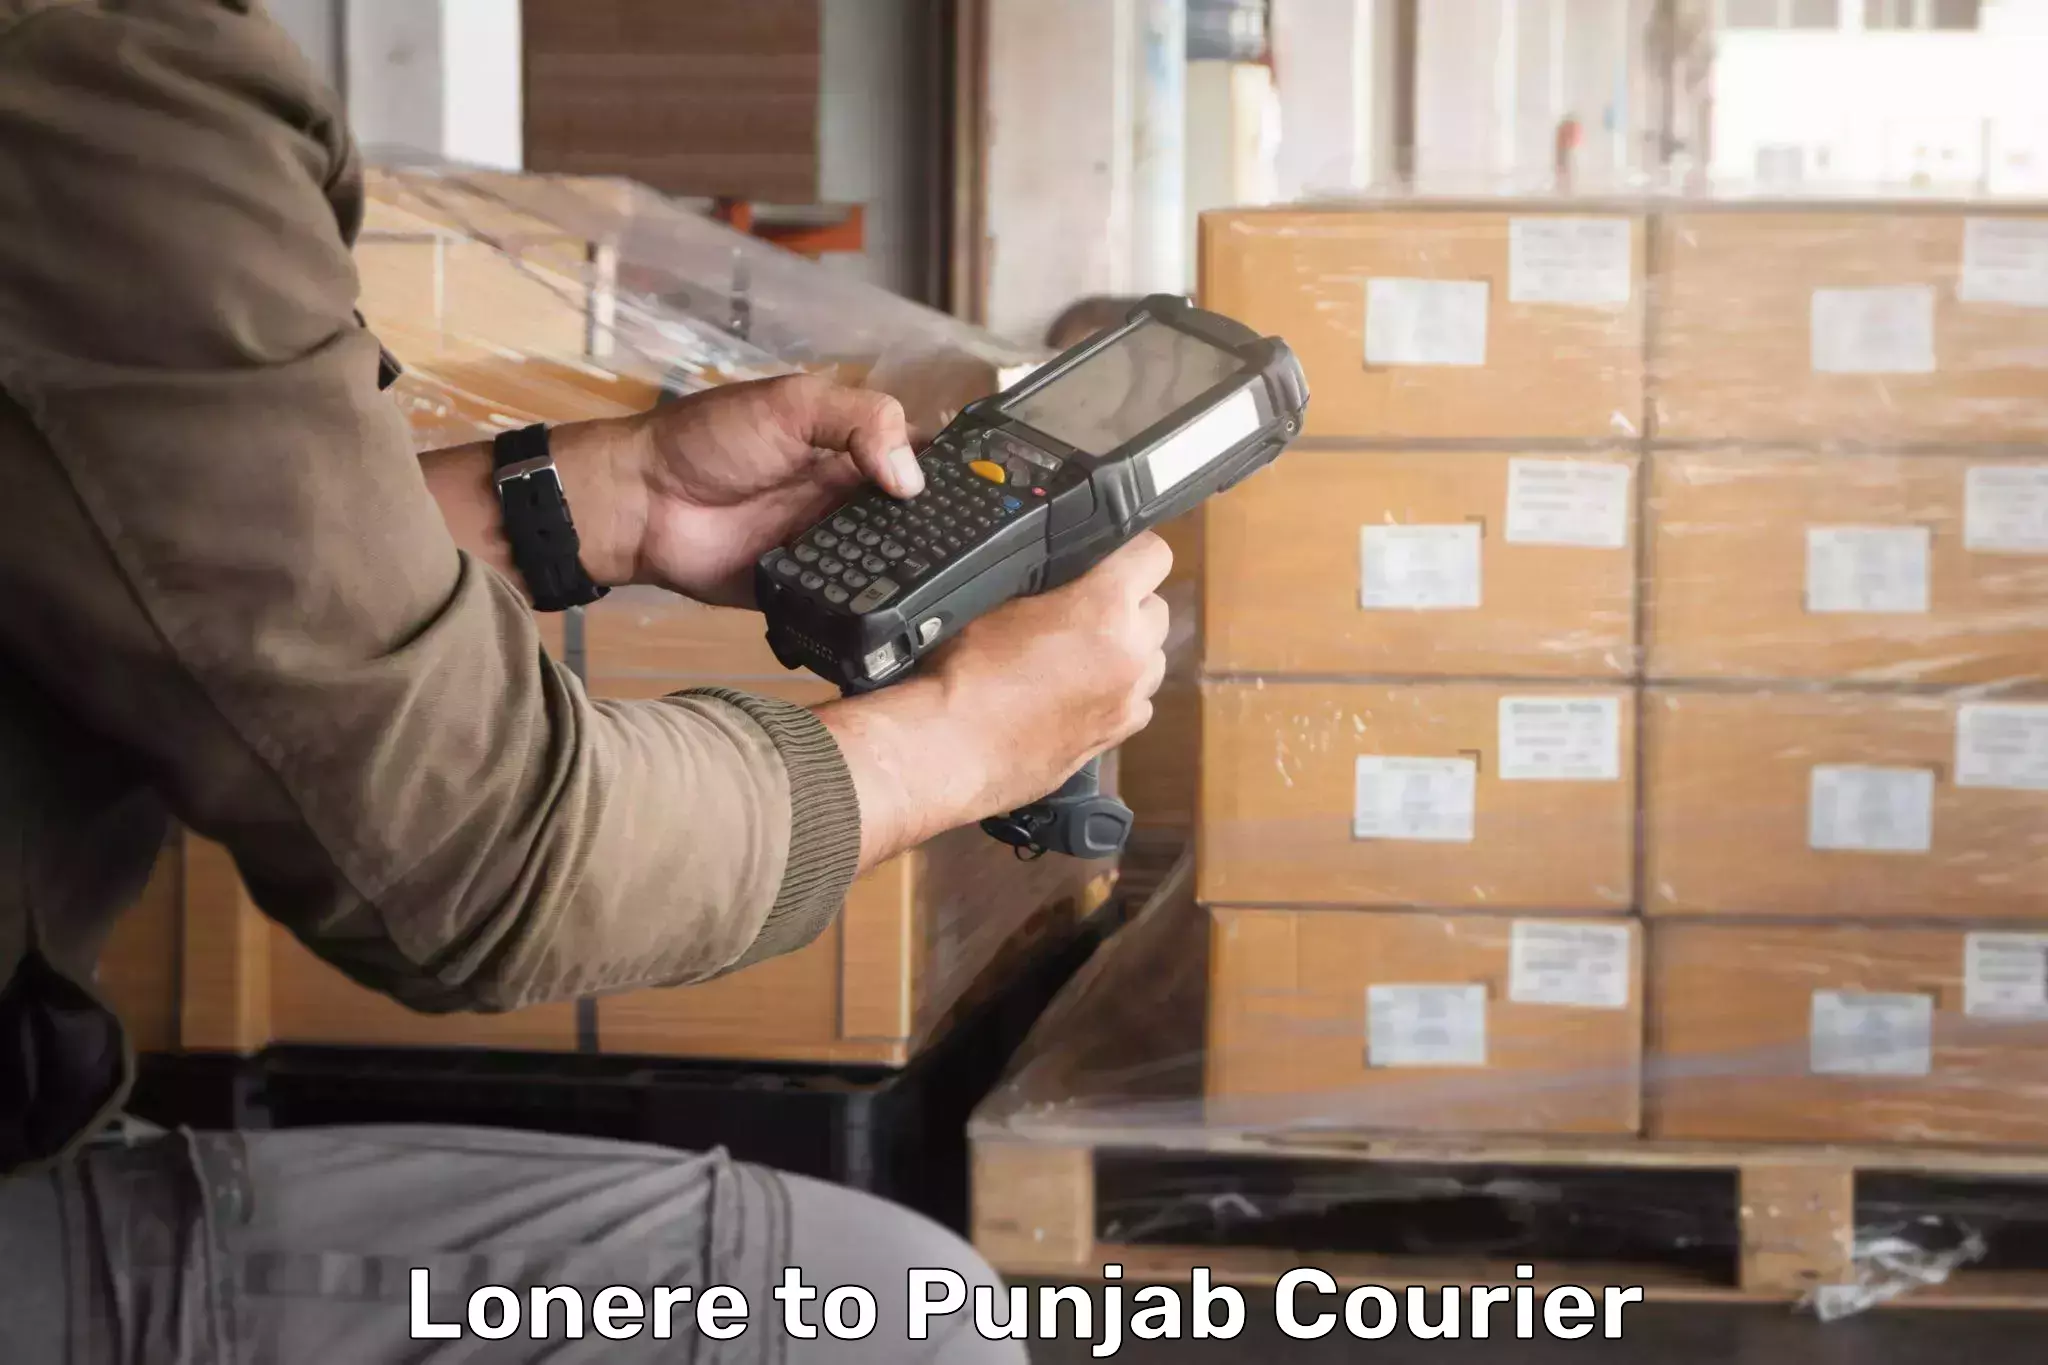 Seamless shipping experience Lonere to Beas